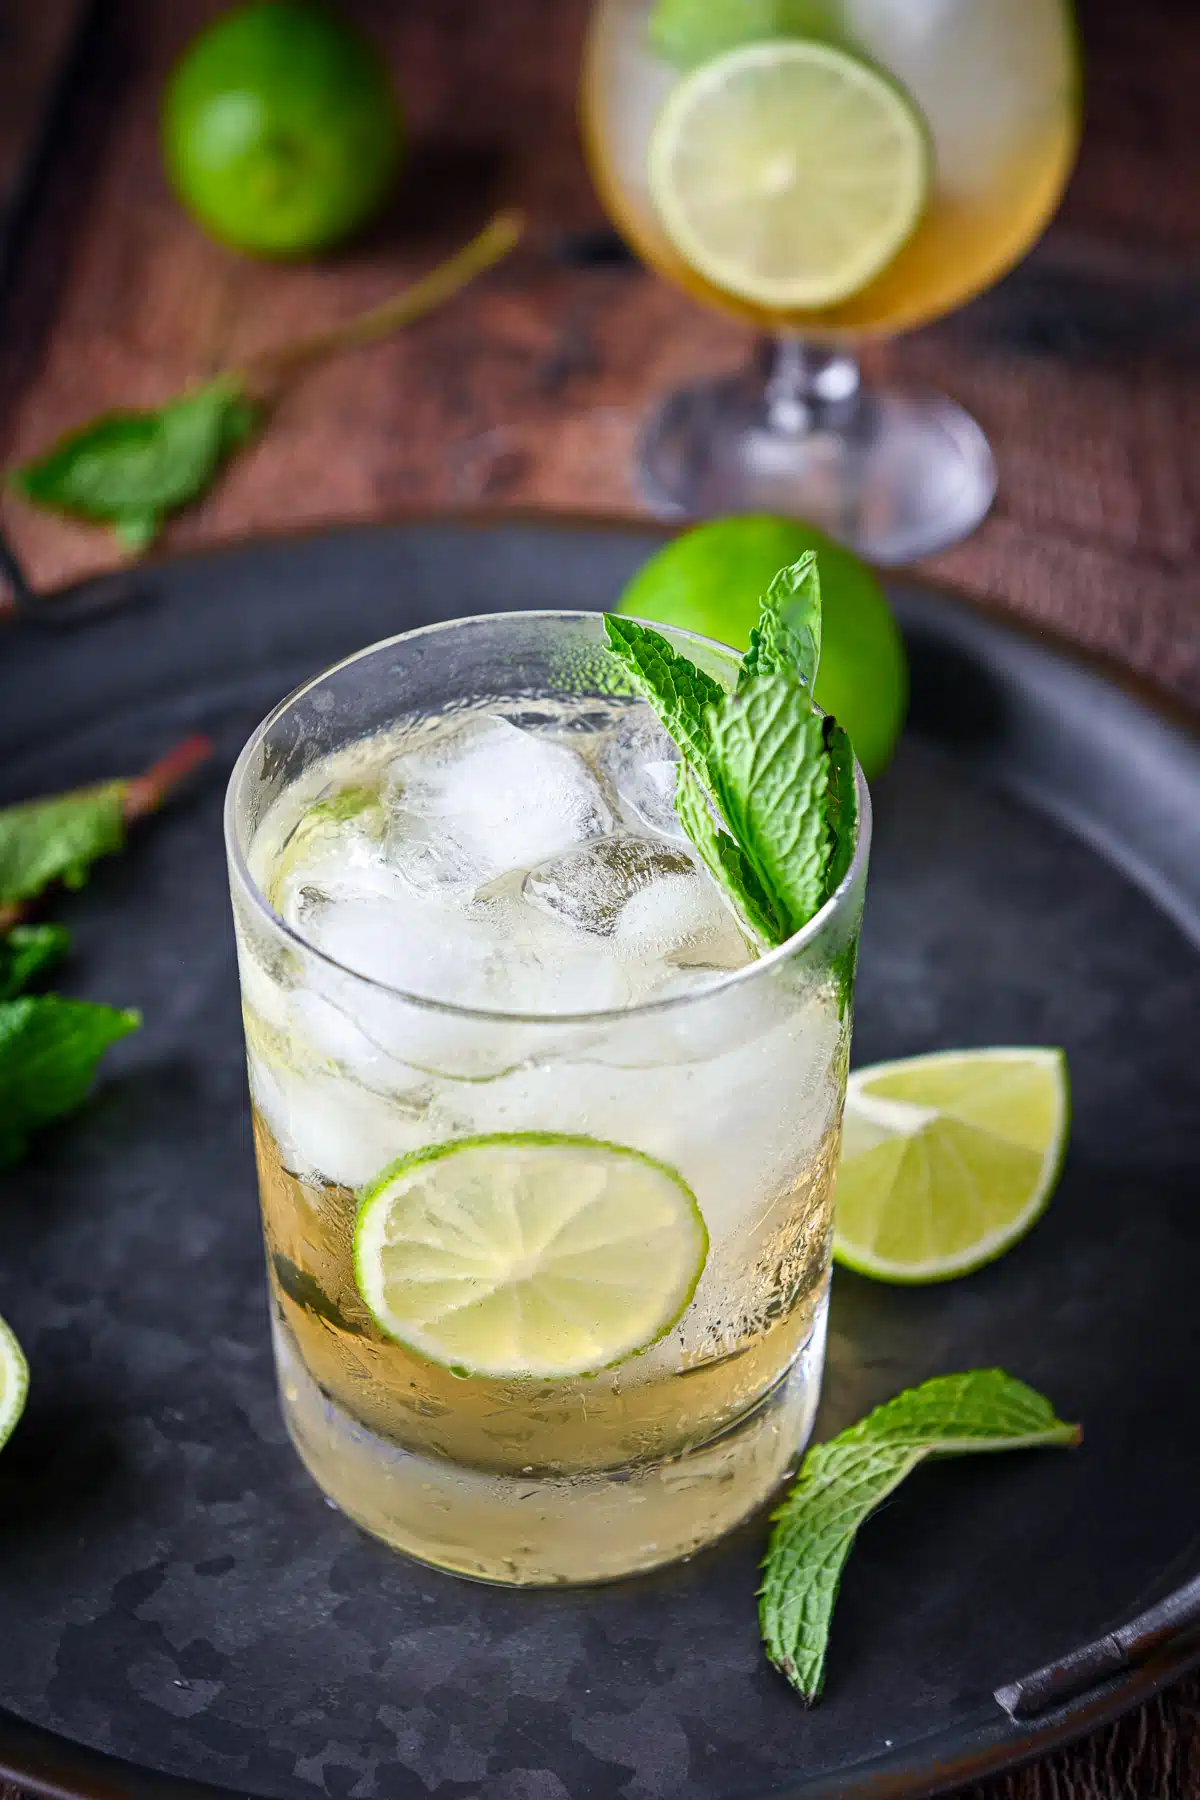 Lime and mint on a tray with a glass filled with the lime cocktail